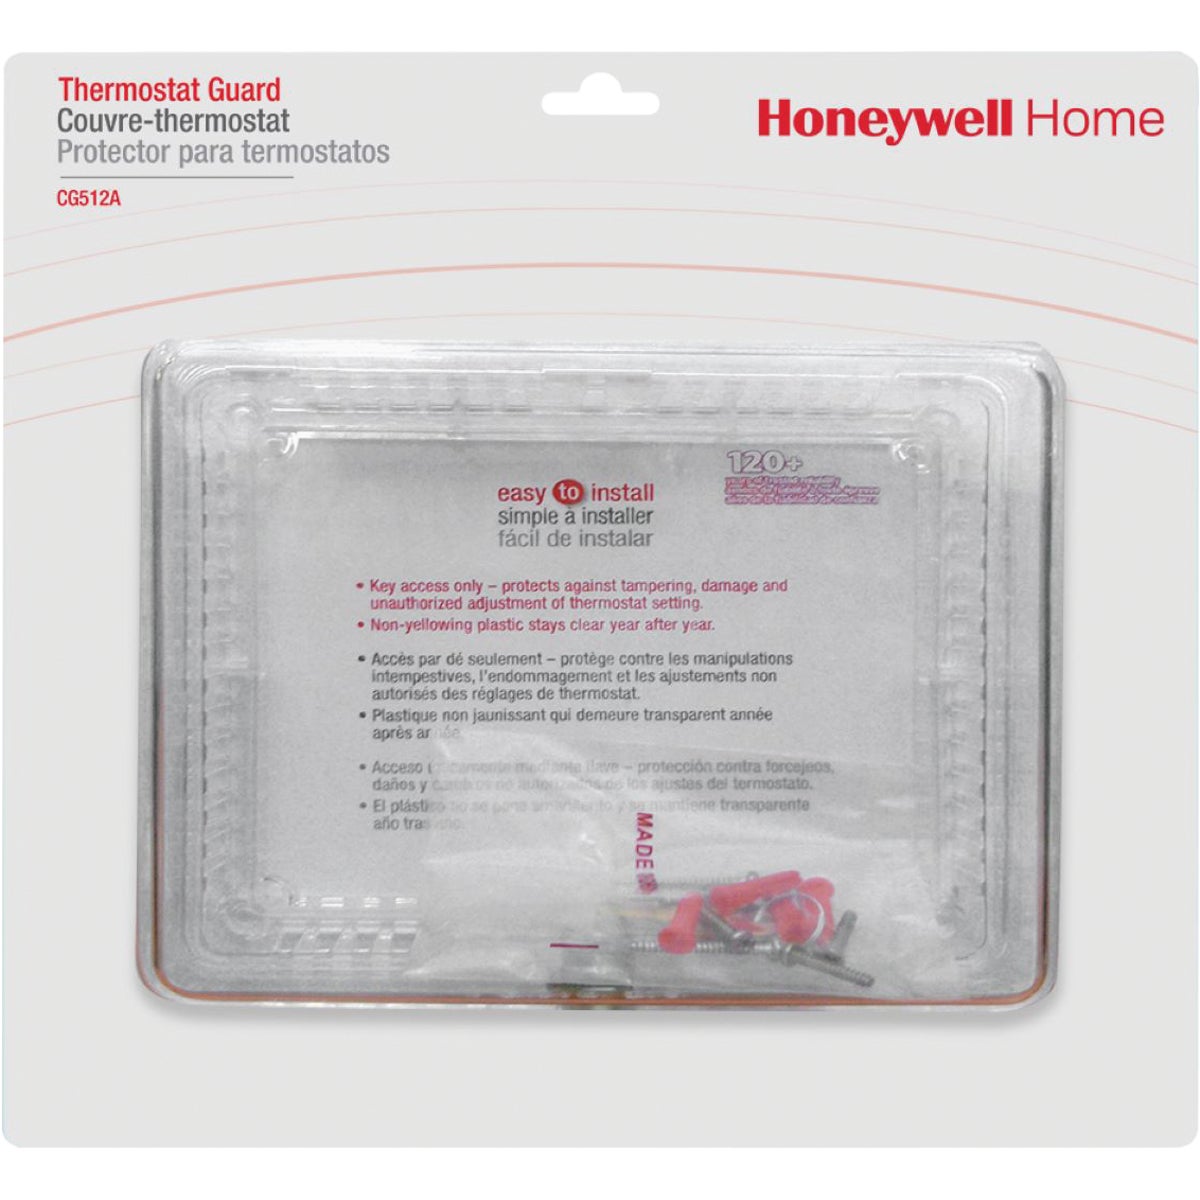 Honeywell Home Clear 9-3/4 In. 7-1/4 In. Thermostat Guard